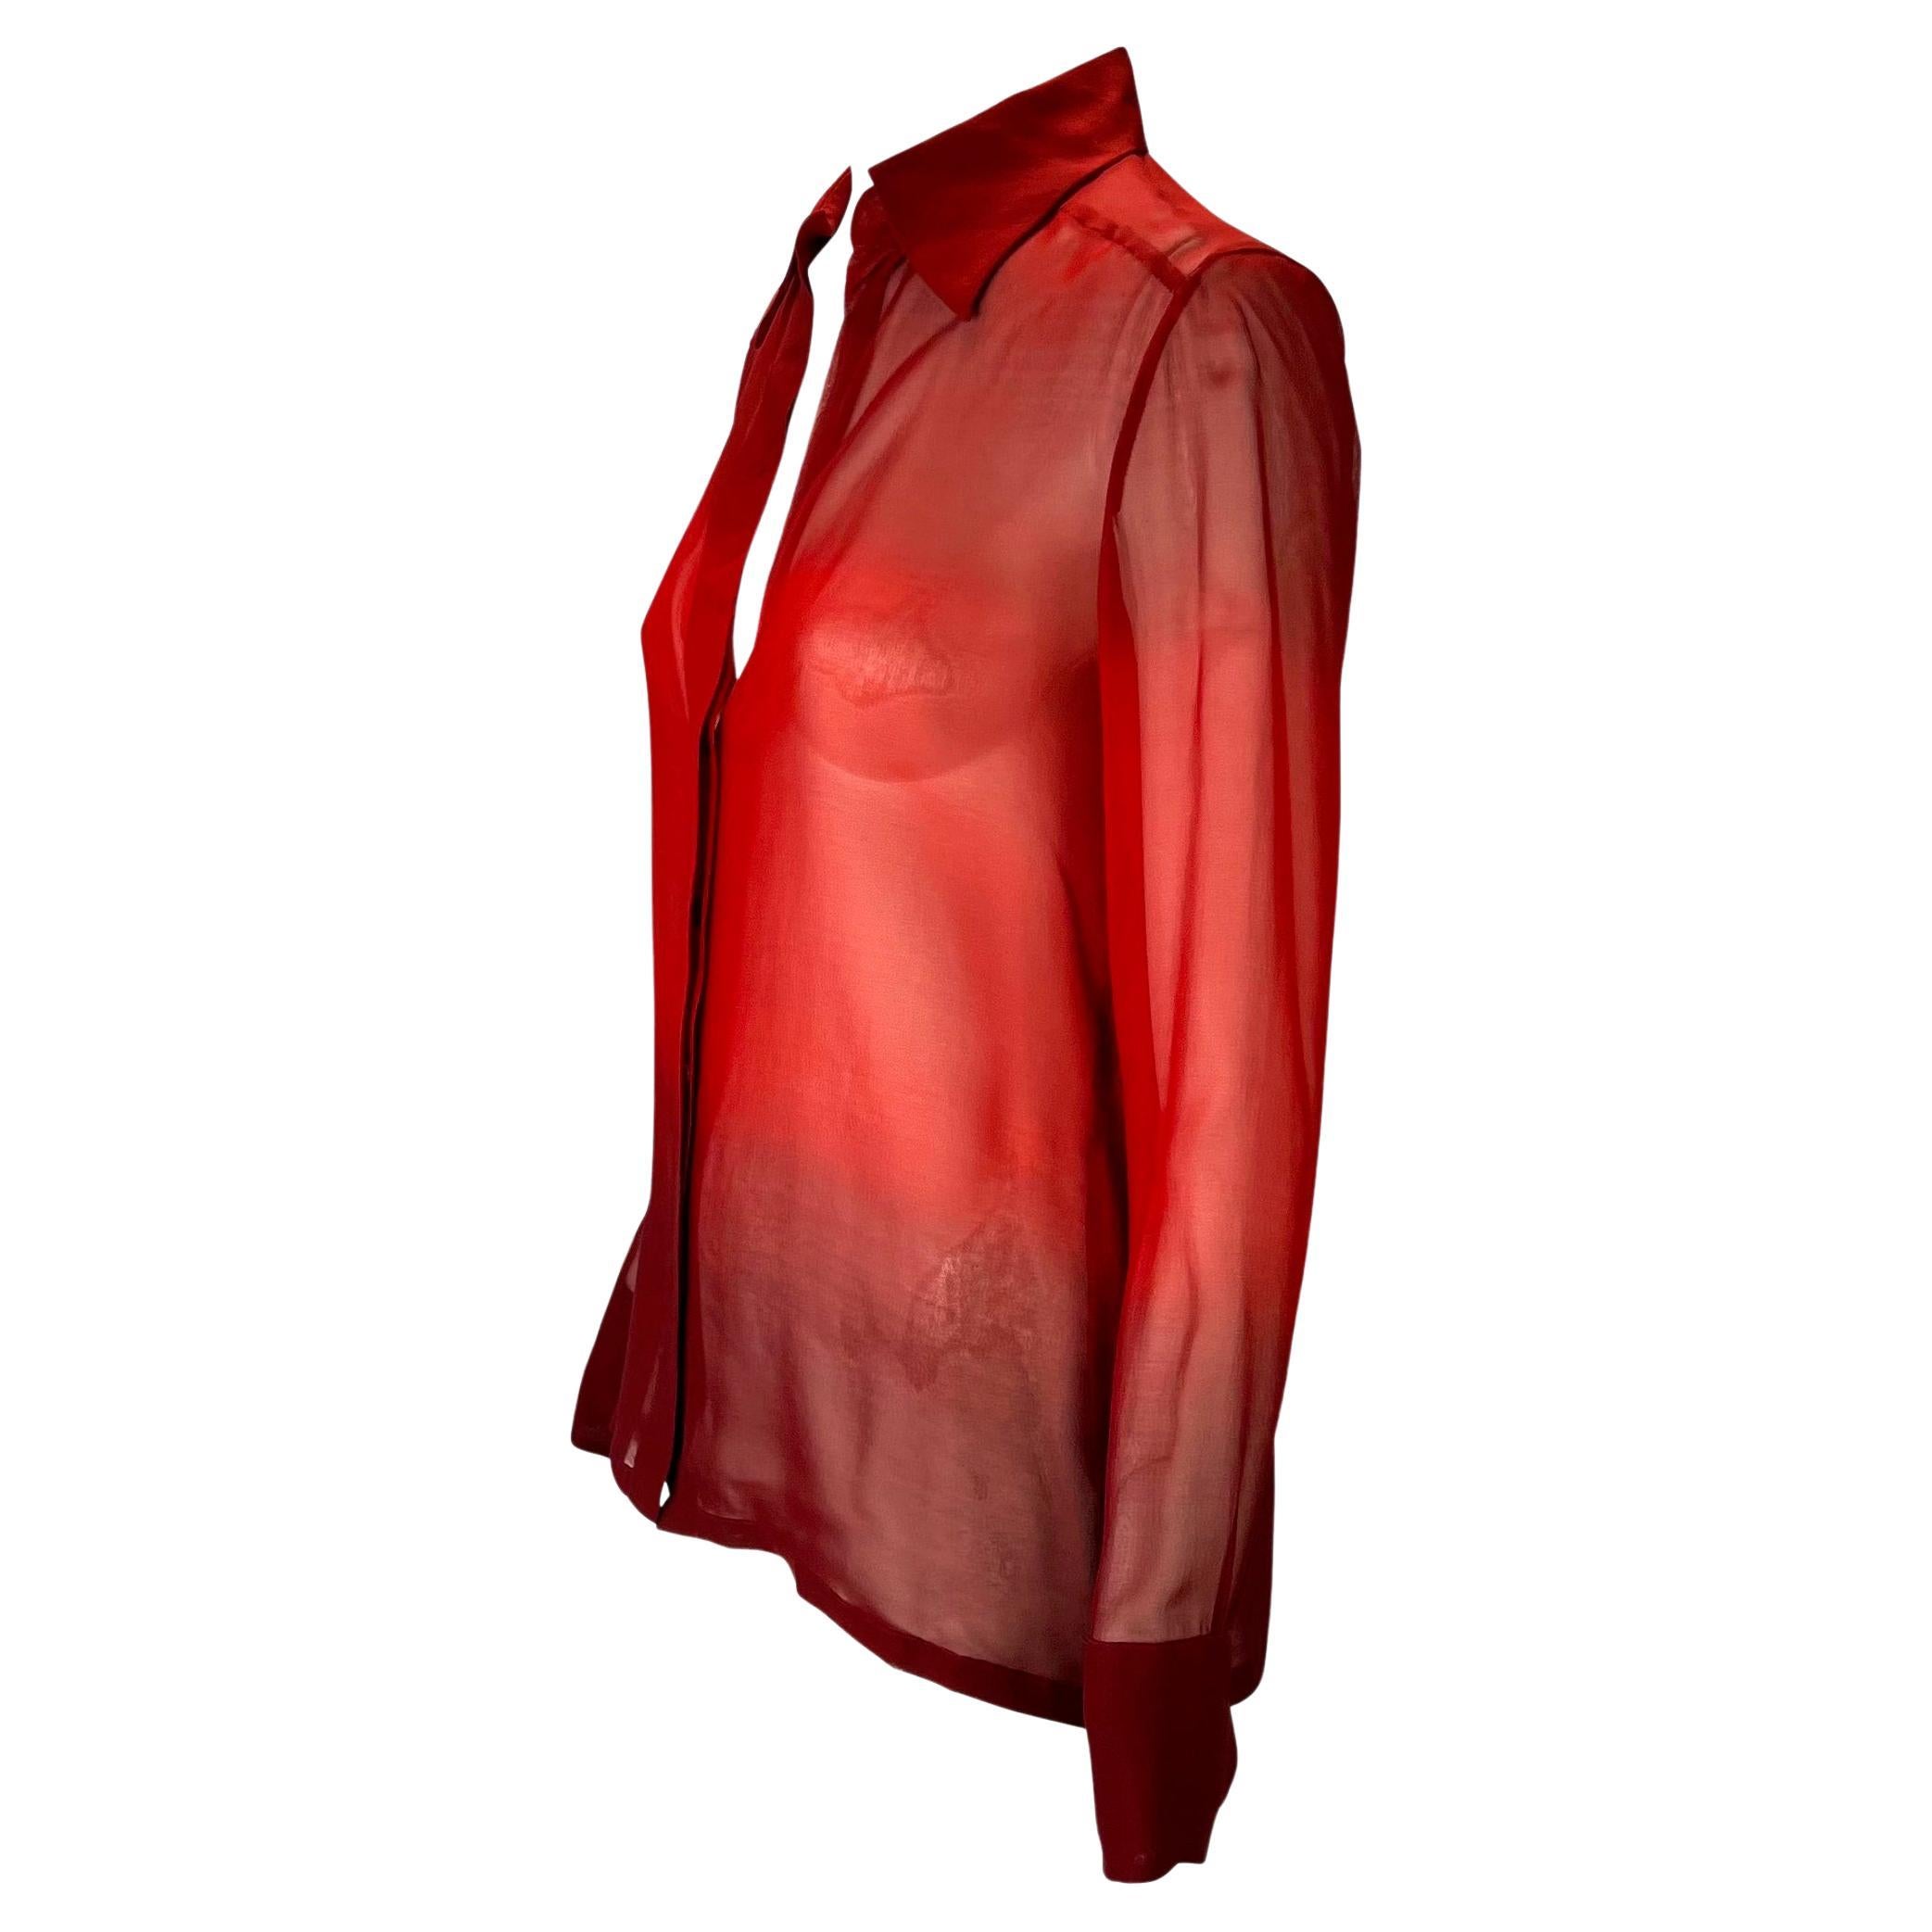 Presenting a beautiful sheer ombré shirt, designed by Tom Ford for Gucci's Spring/Summer 1997 collection. The button closure stops about halfway up the front for a plunging neckline. Chic and sexy is what Tom Ford does best and this shirt is no